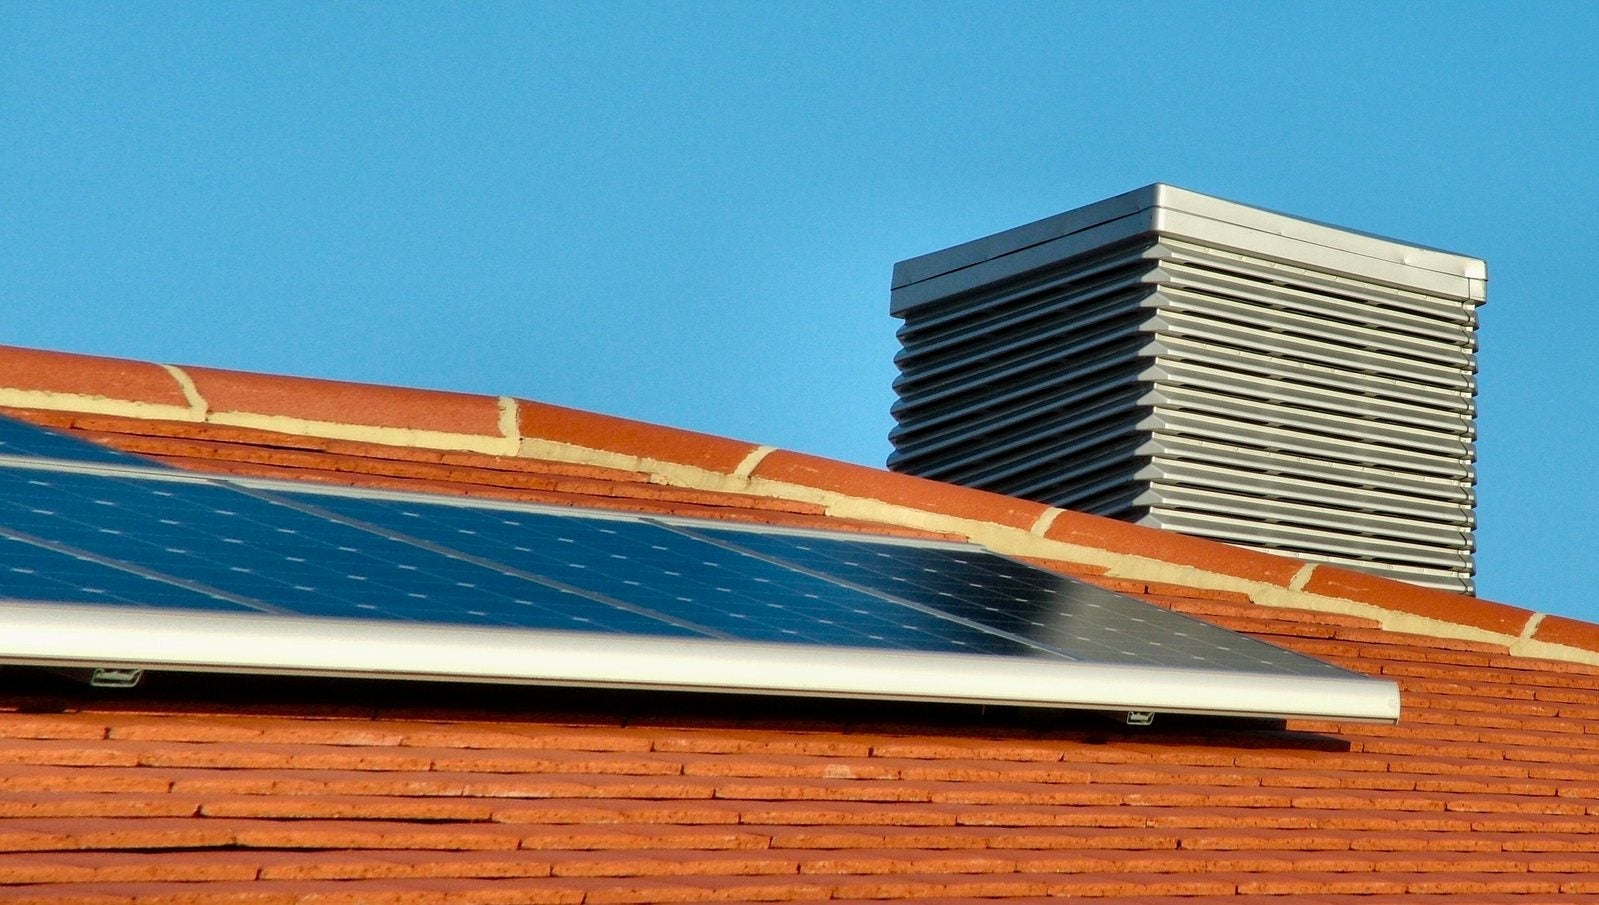 Close-up of solar panels on a terracotta roof